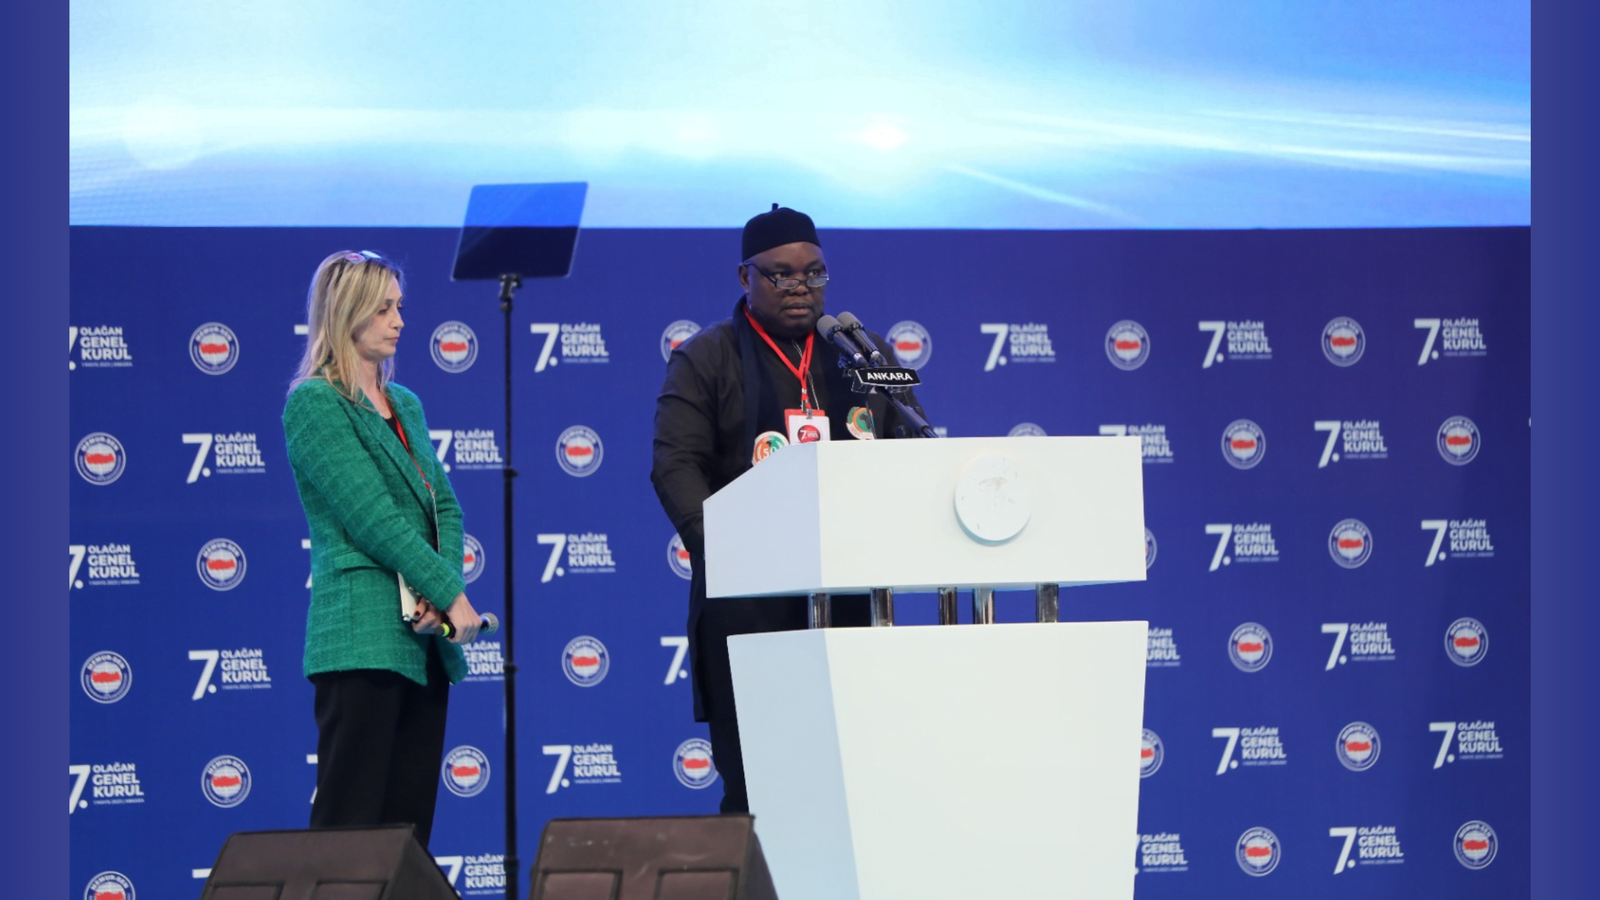 Read more about the article OATUU Deputy Secretary-General emphasises need for trade union unity and international solidarity at MEMUR-SEN Congress.